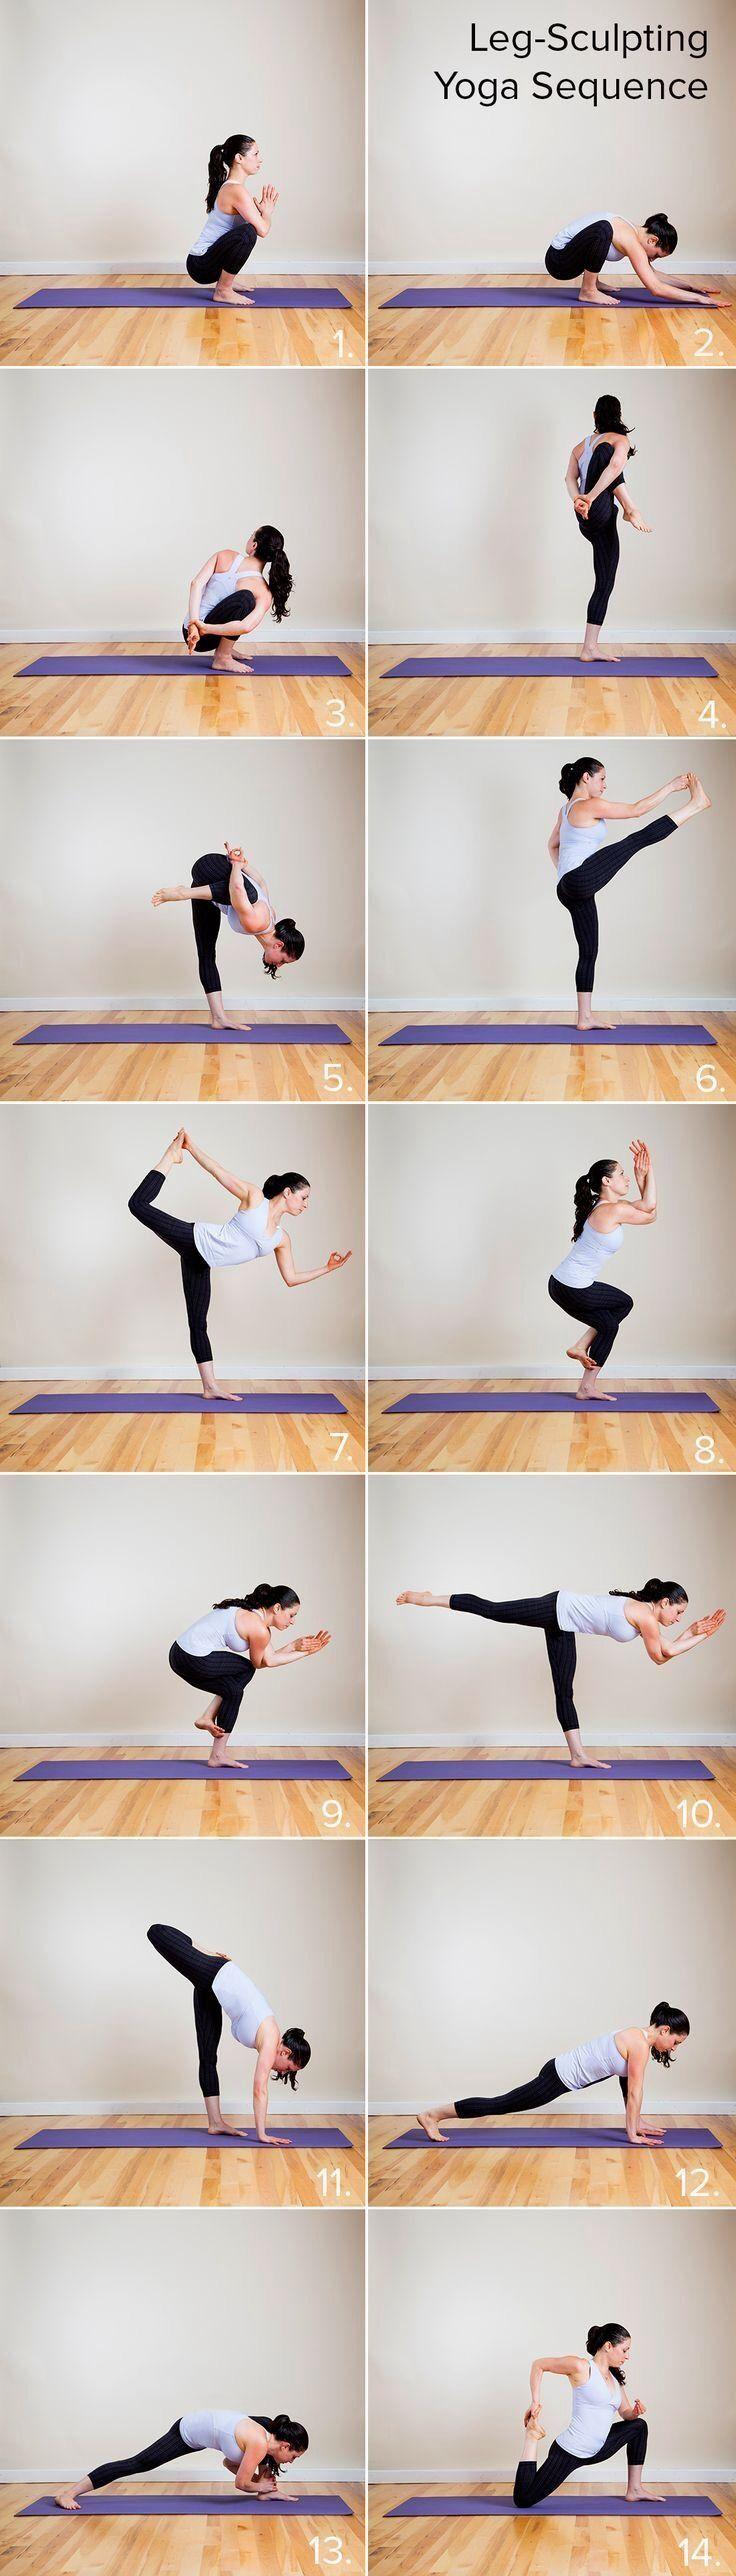 Mariage - Holy Hot! Yoga Sequence To Do Your Tight Pants Justice